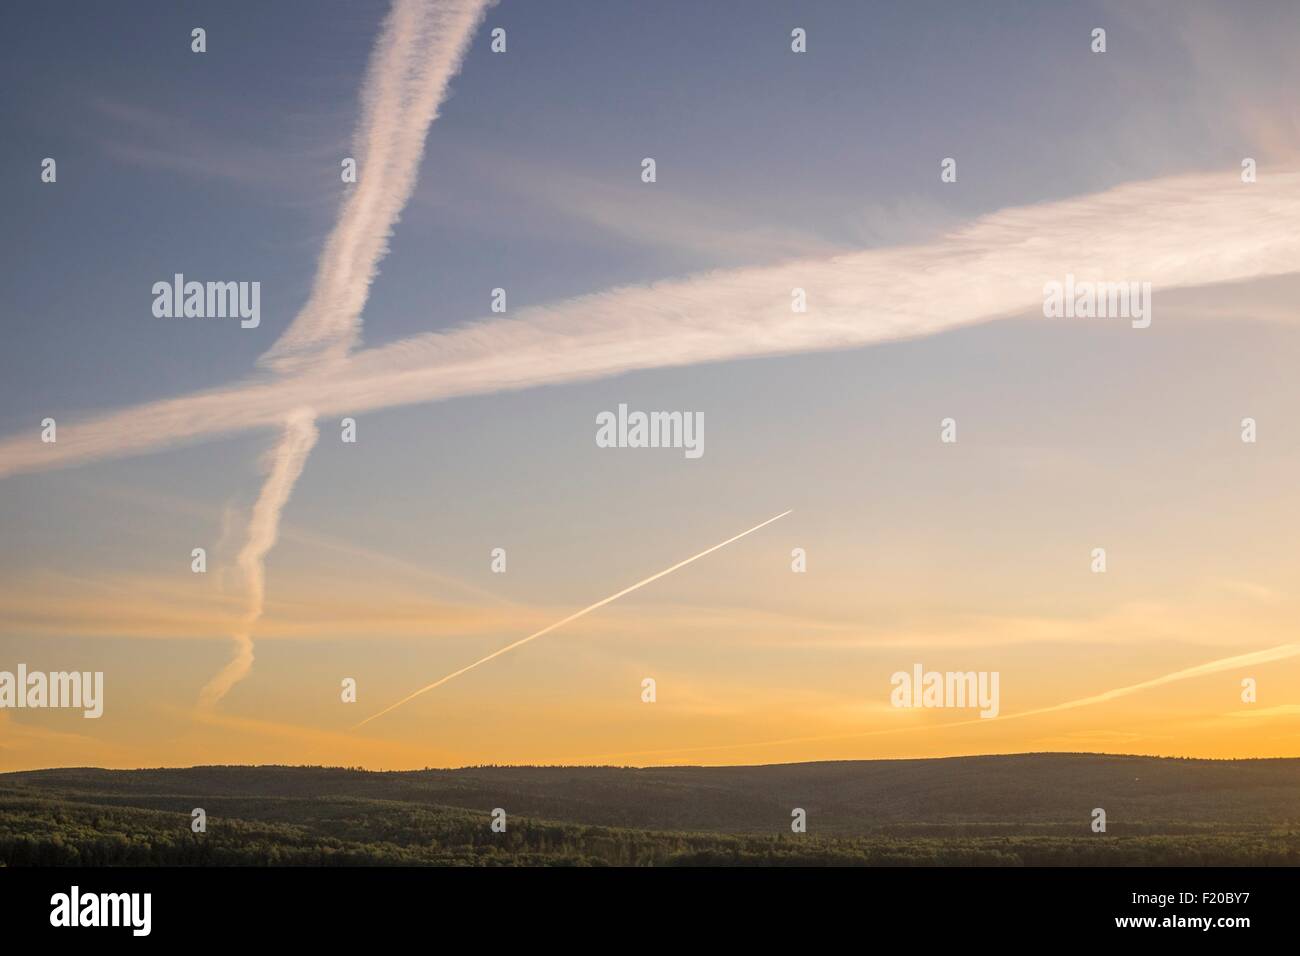 Silhouetted hillside view of sunset sky with criss crossing vapour trails Stock Photo